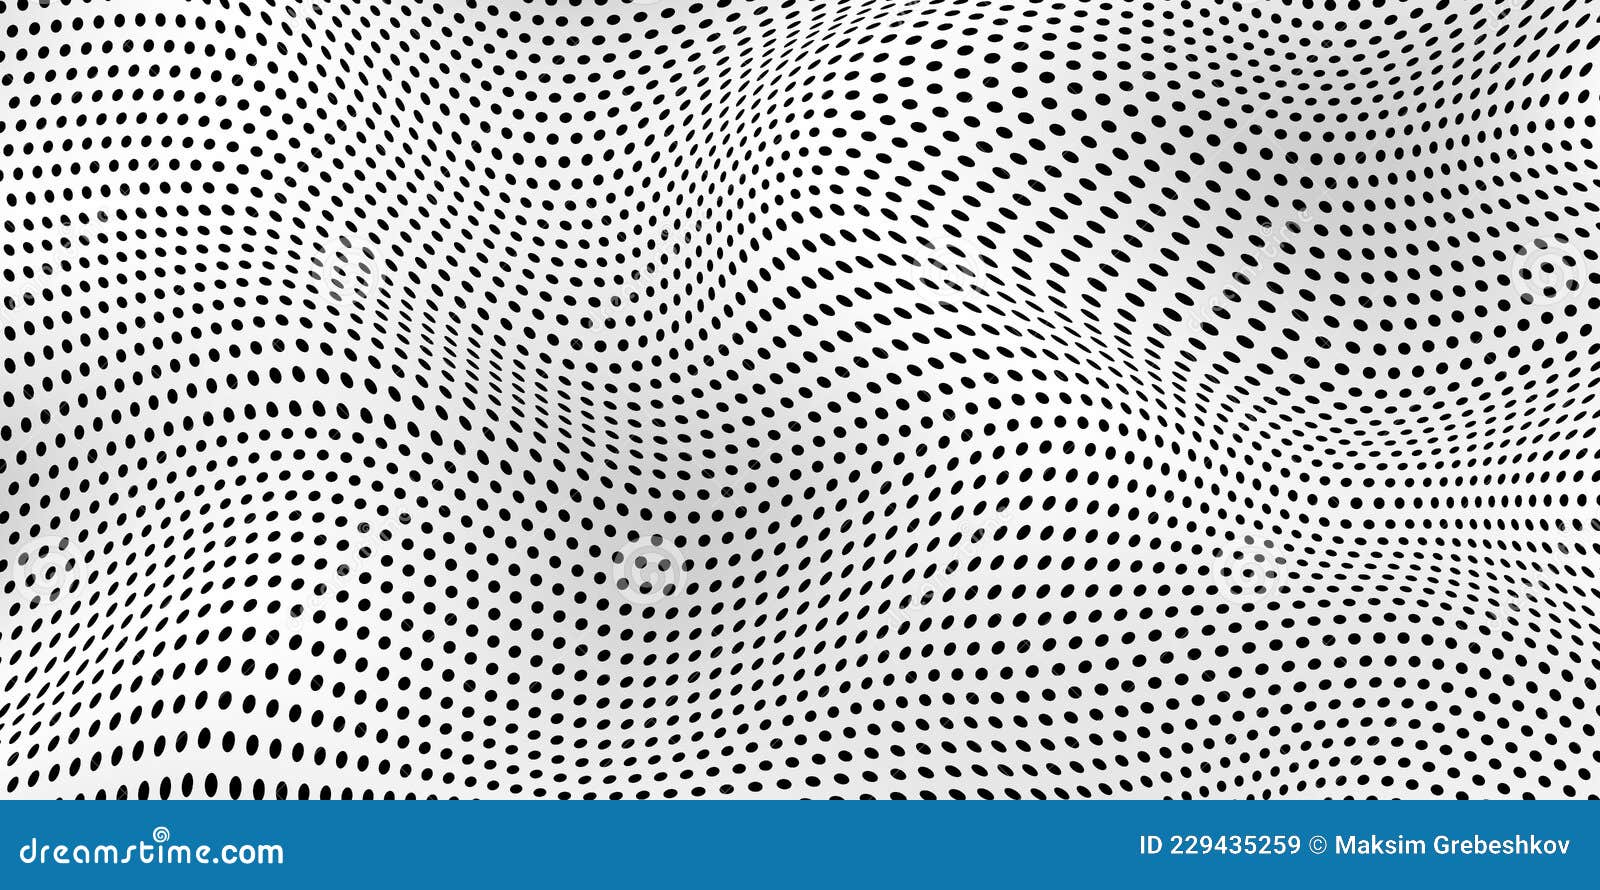 Abstract Wave Dot Halftone Pattern, Grid Paper Background Stock Vector ...